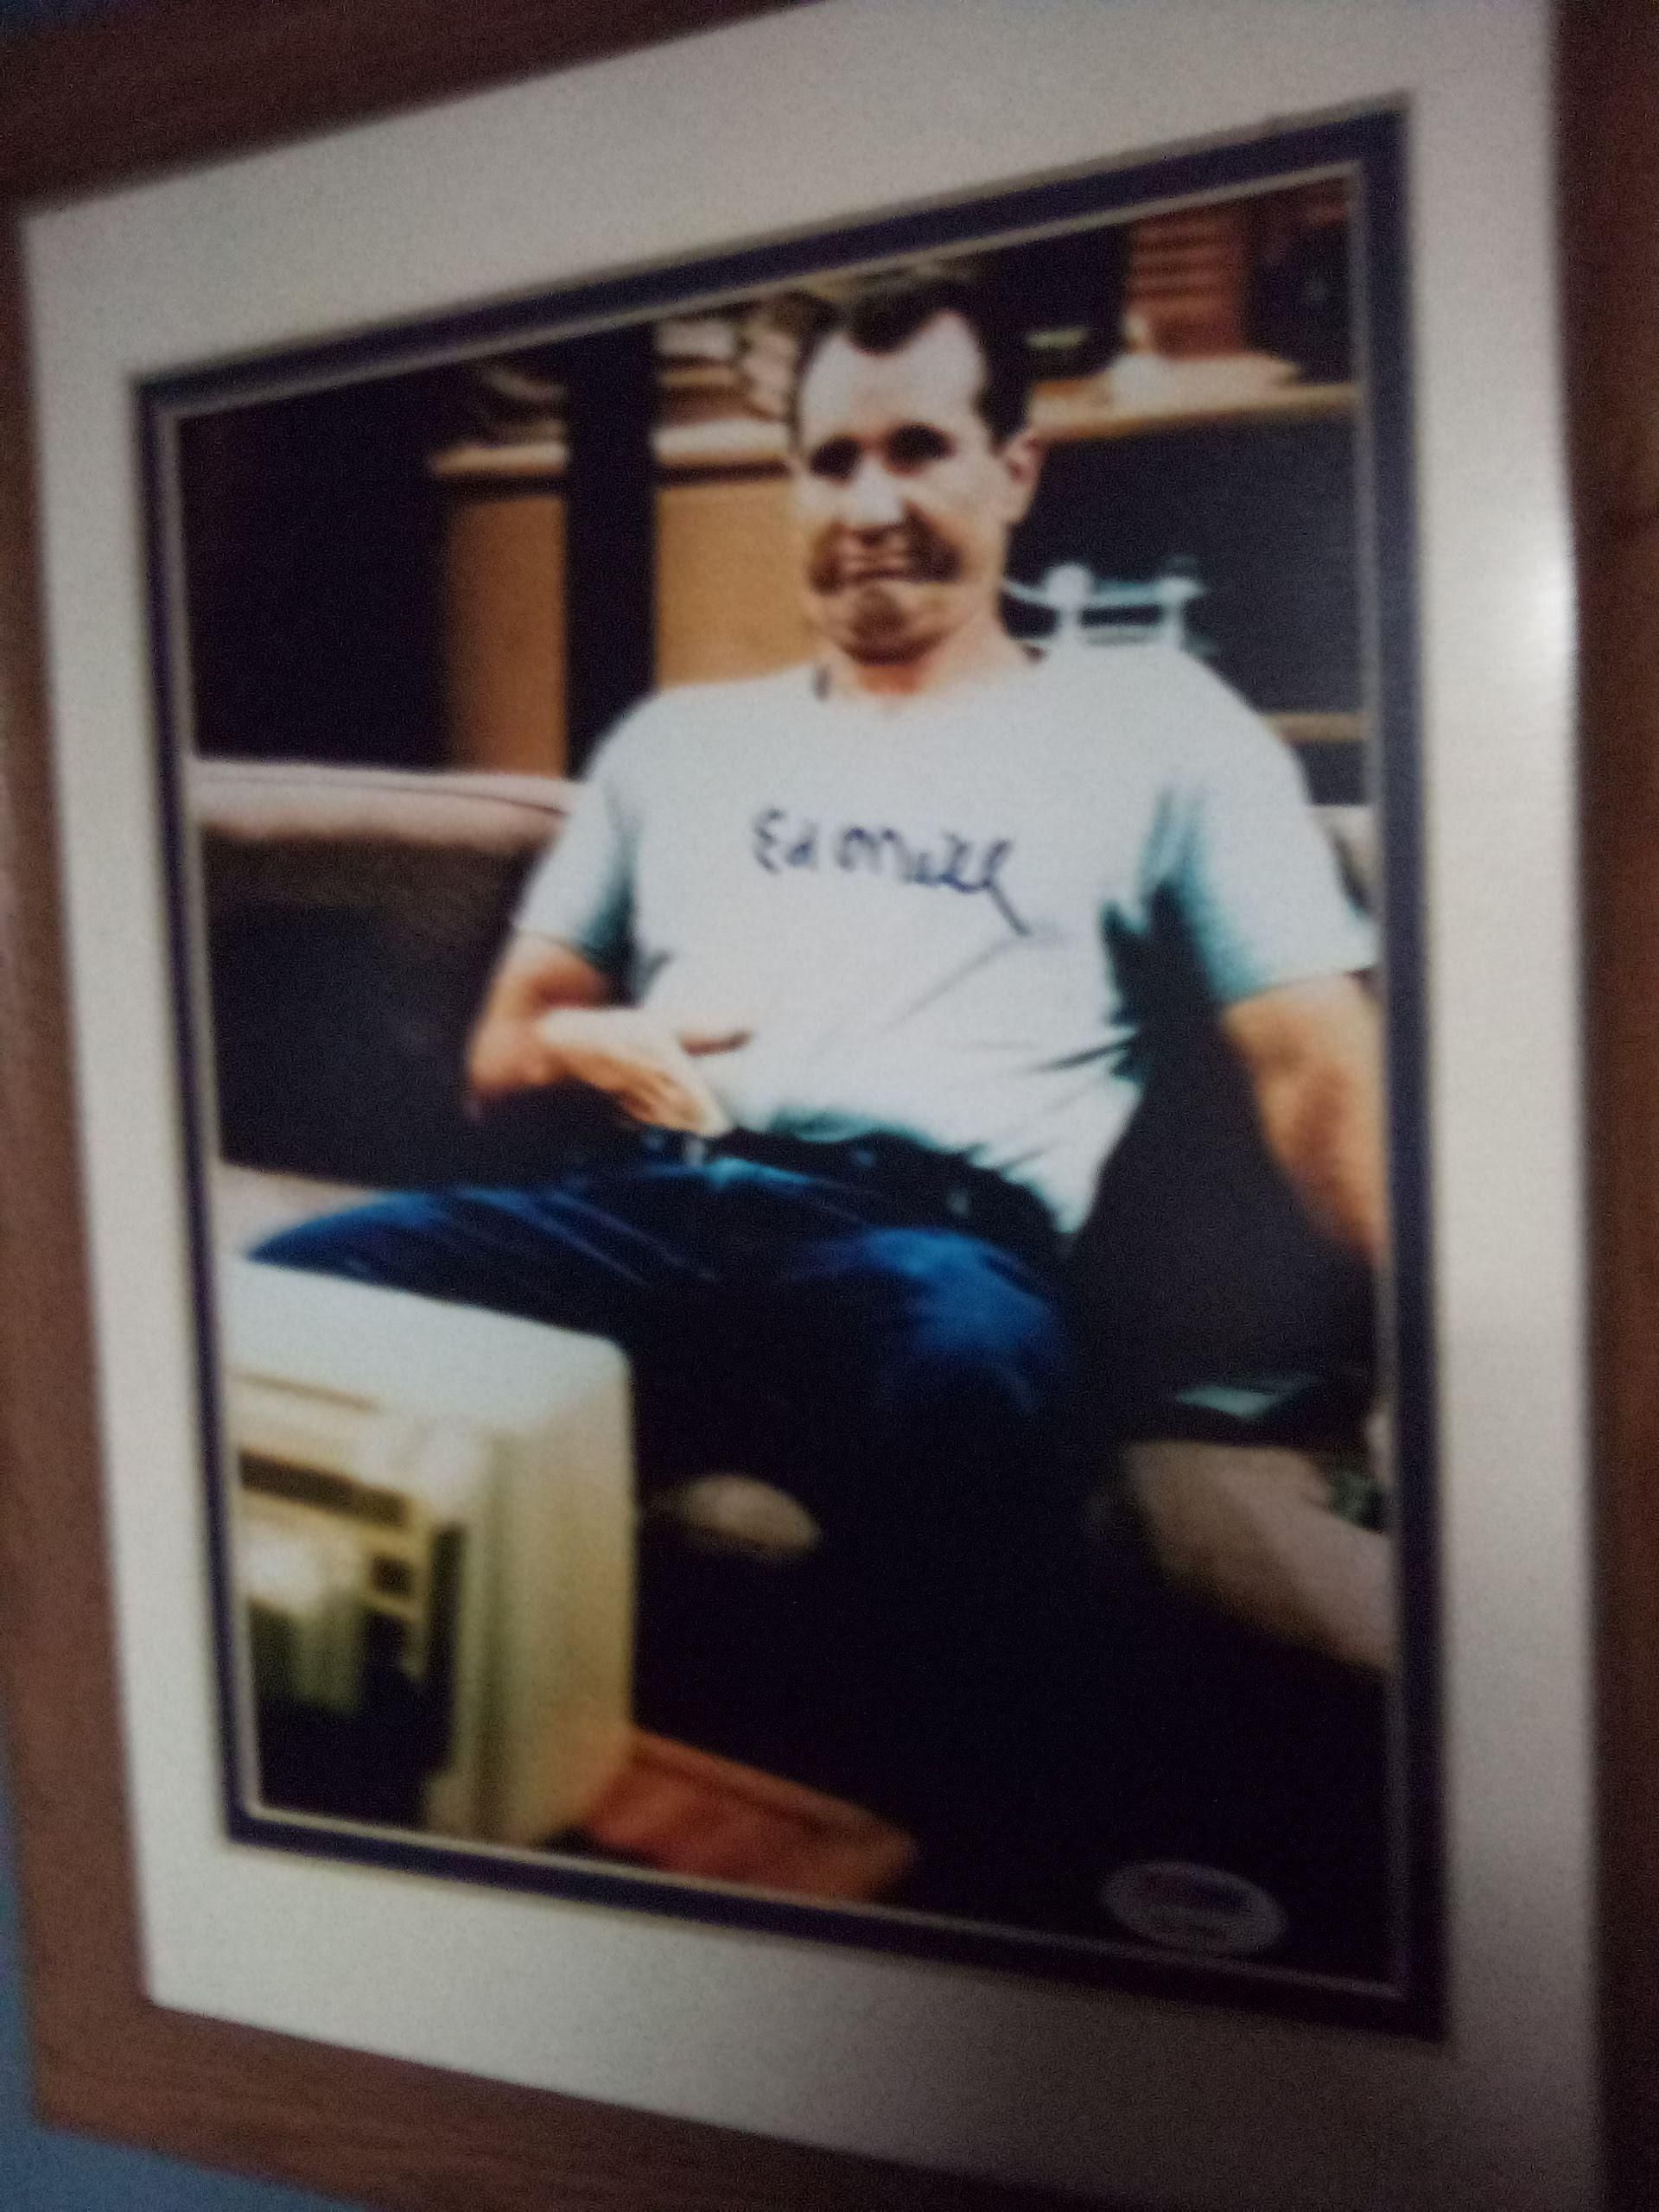 Remember Married With Children? My dad has an autographed picture of Ed O'Neill above his bar...